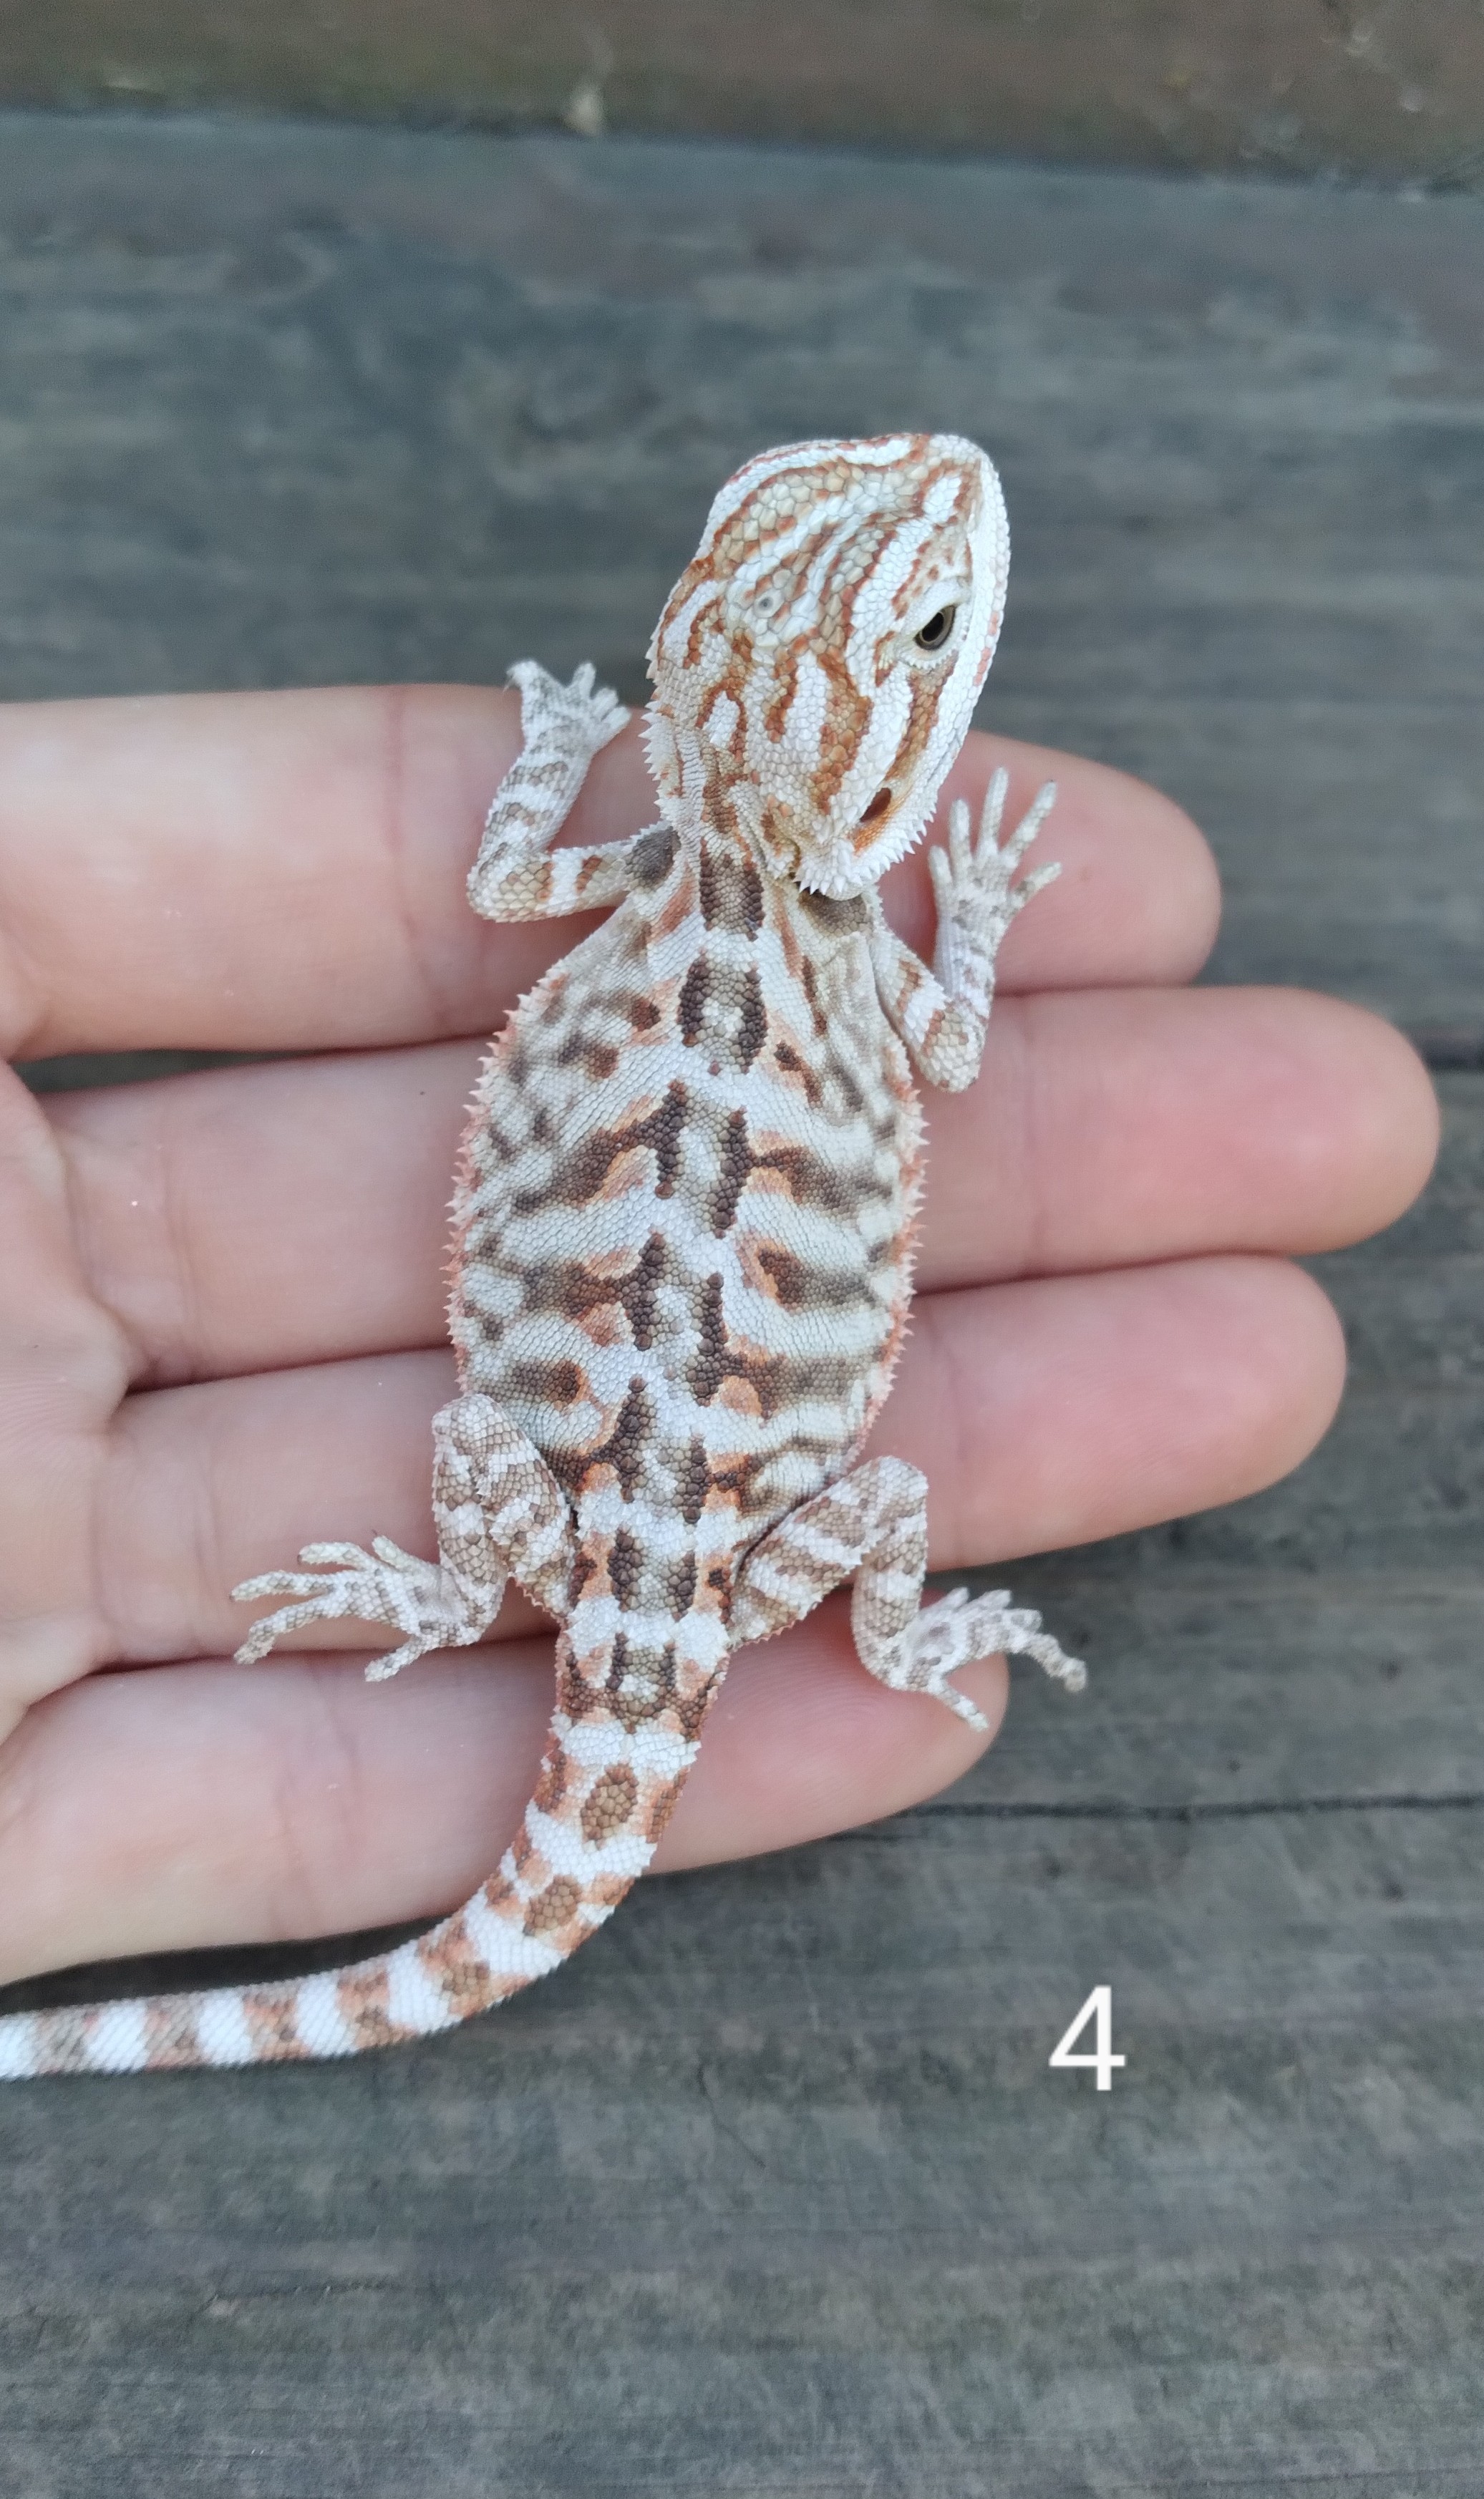 Leatherback Central Bearded Dragon by Dragon Fortress Reptiles